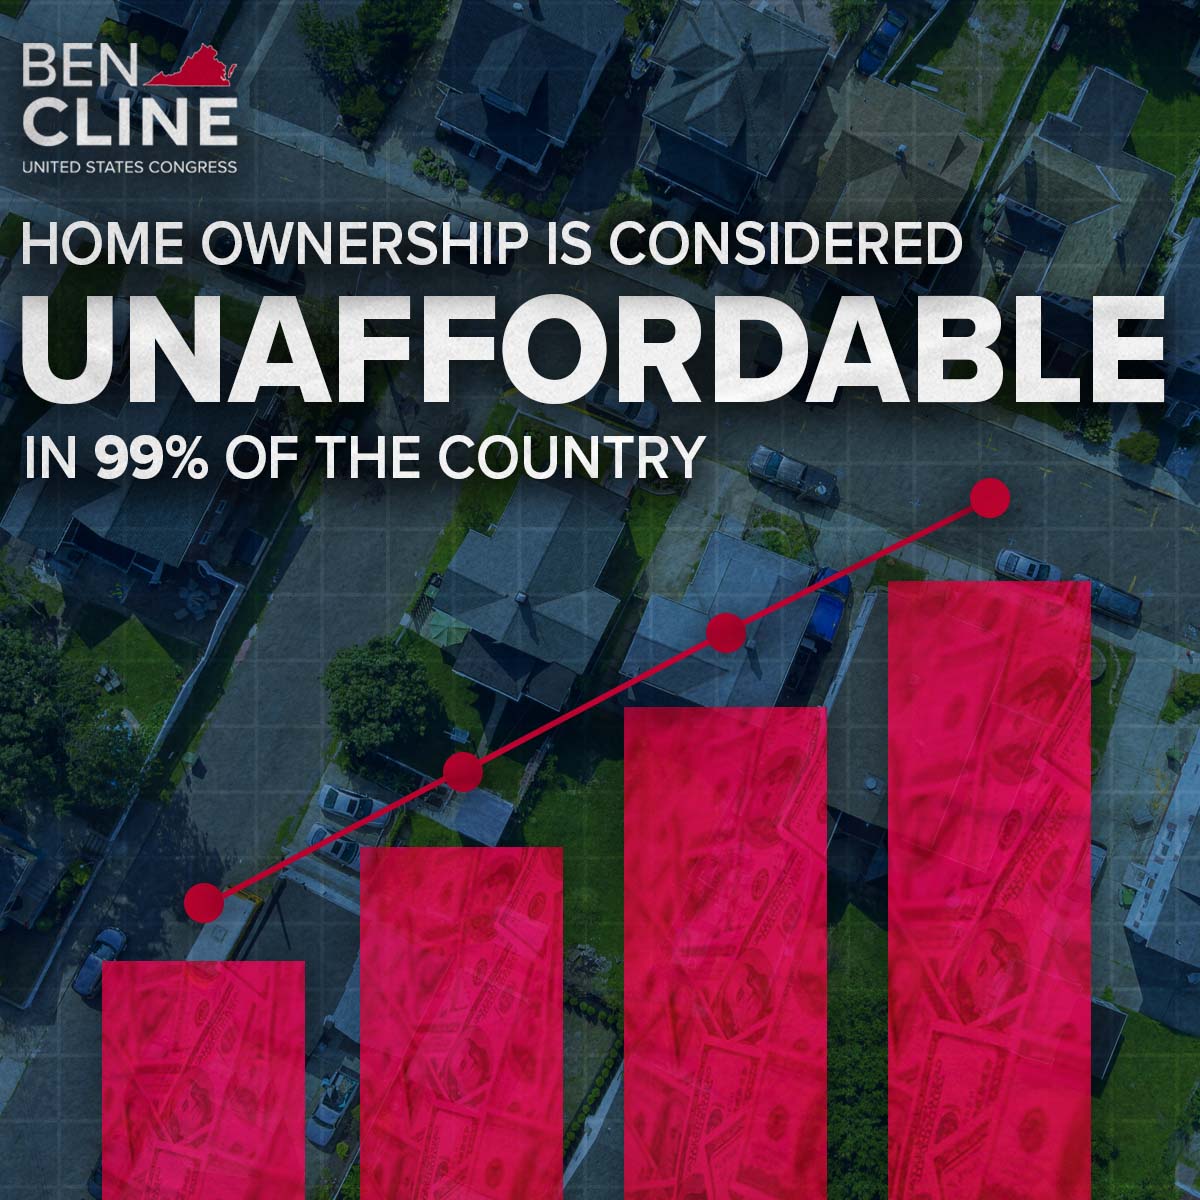 Did you know that homeownership is considered UNAFFORDABLE in 99% of the country? Americans must earn upwards of $114,627 a year to afford a median priced home. That is “Bidenomics” in action.